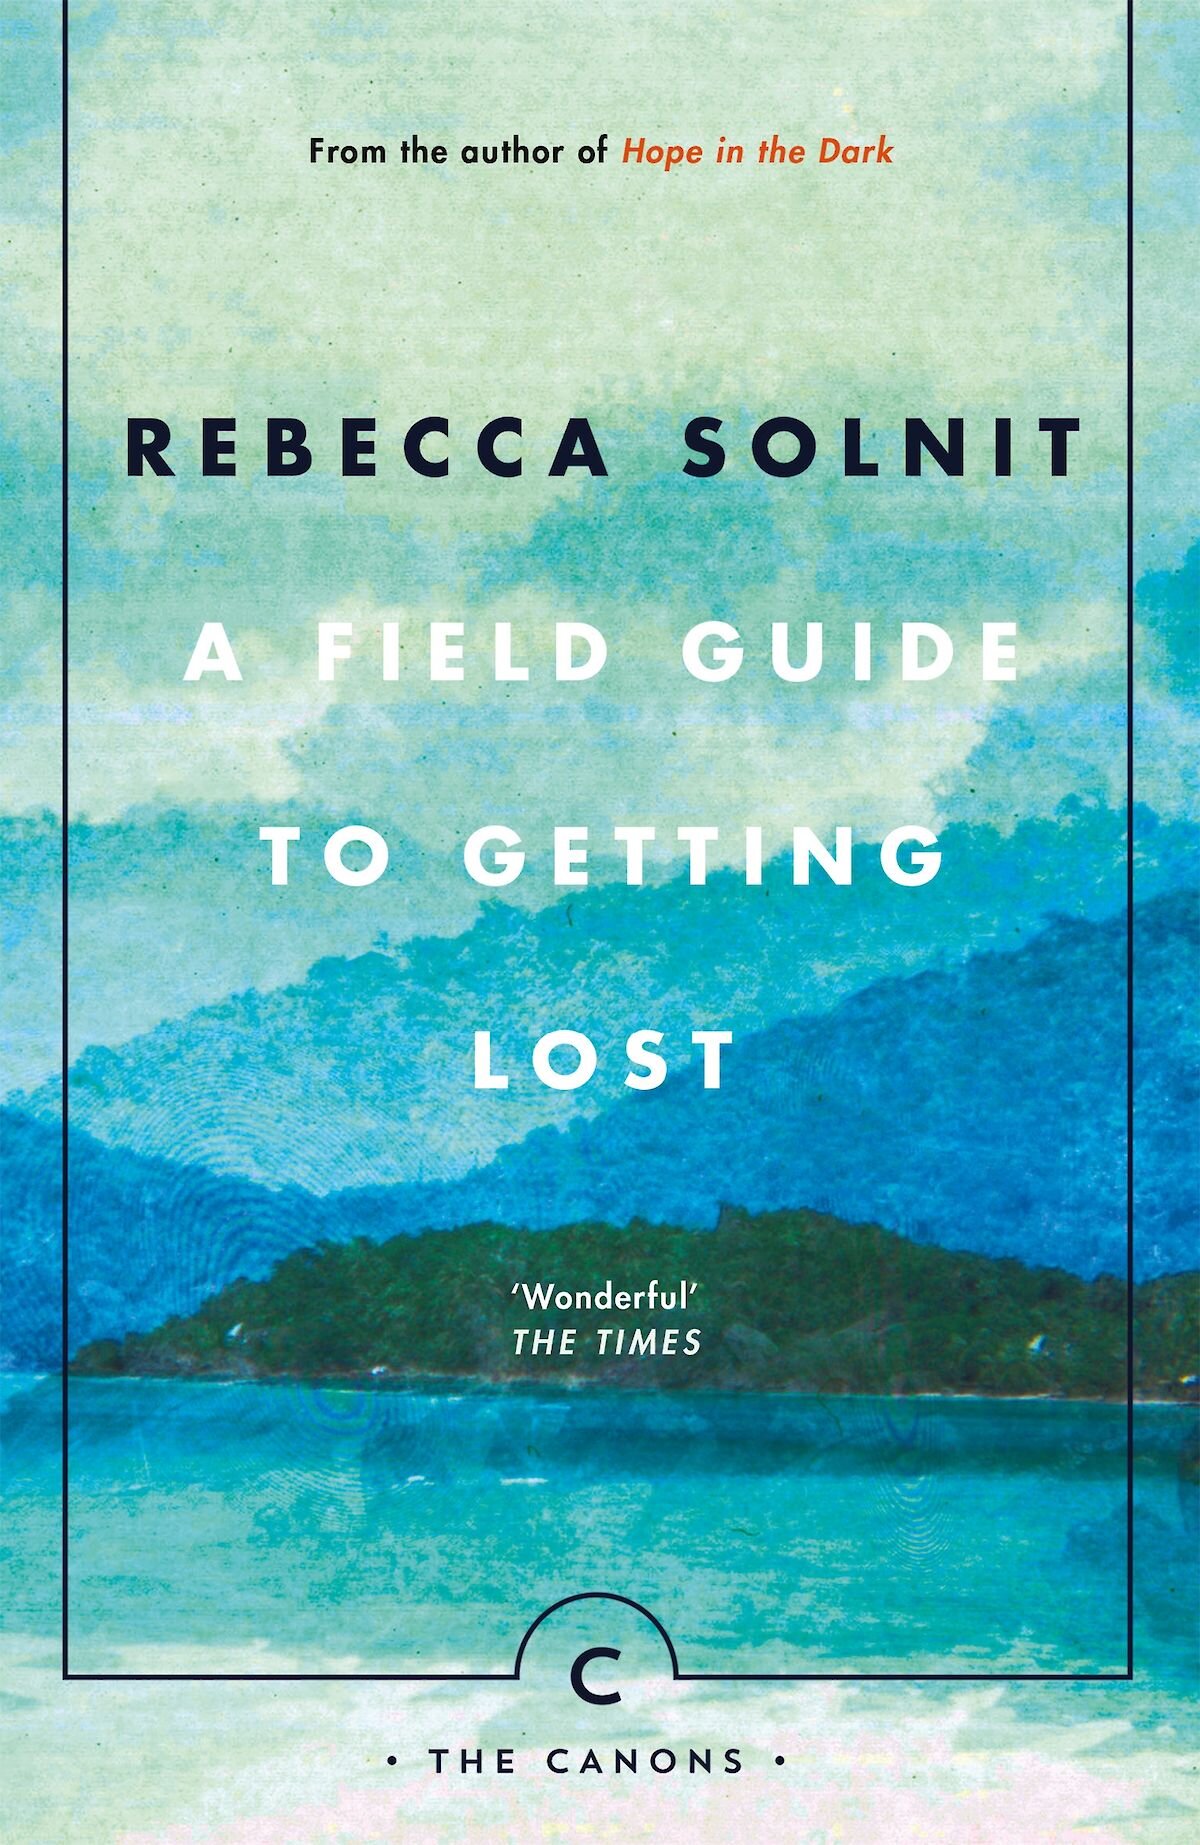 a-field-guide-to-getting-lost-paperback-cover-9781786890511.1200x0.jpg